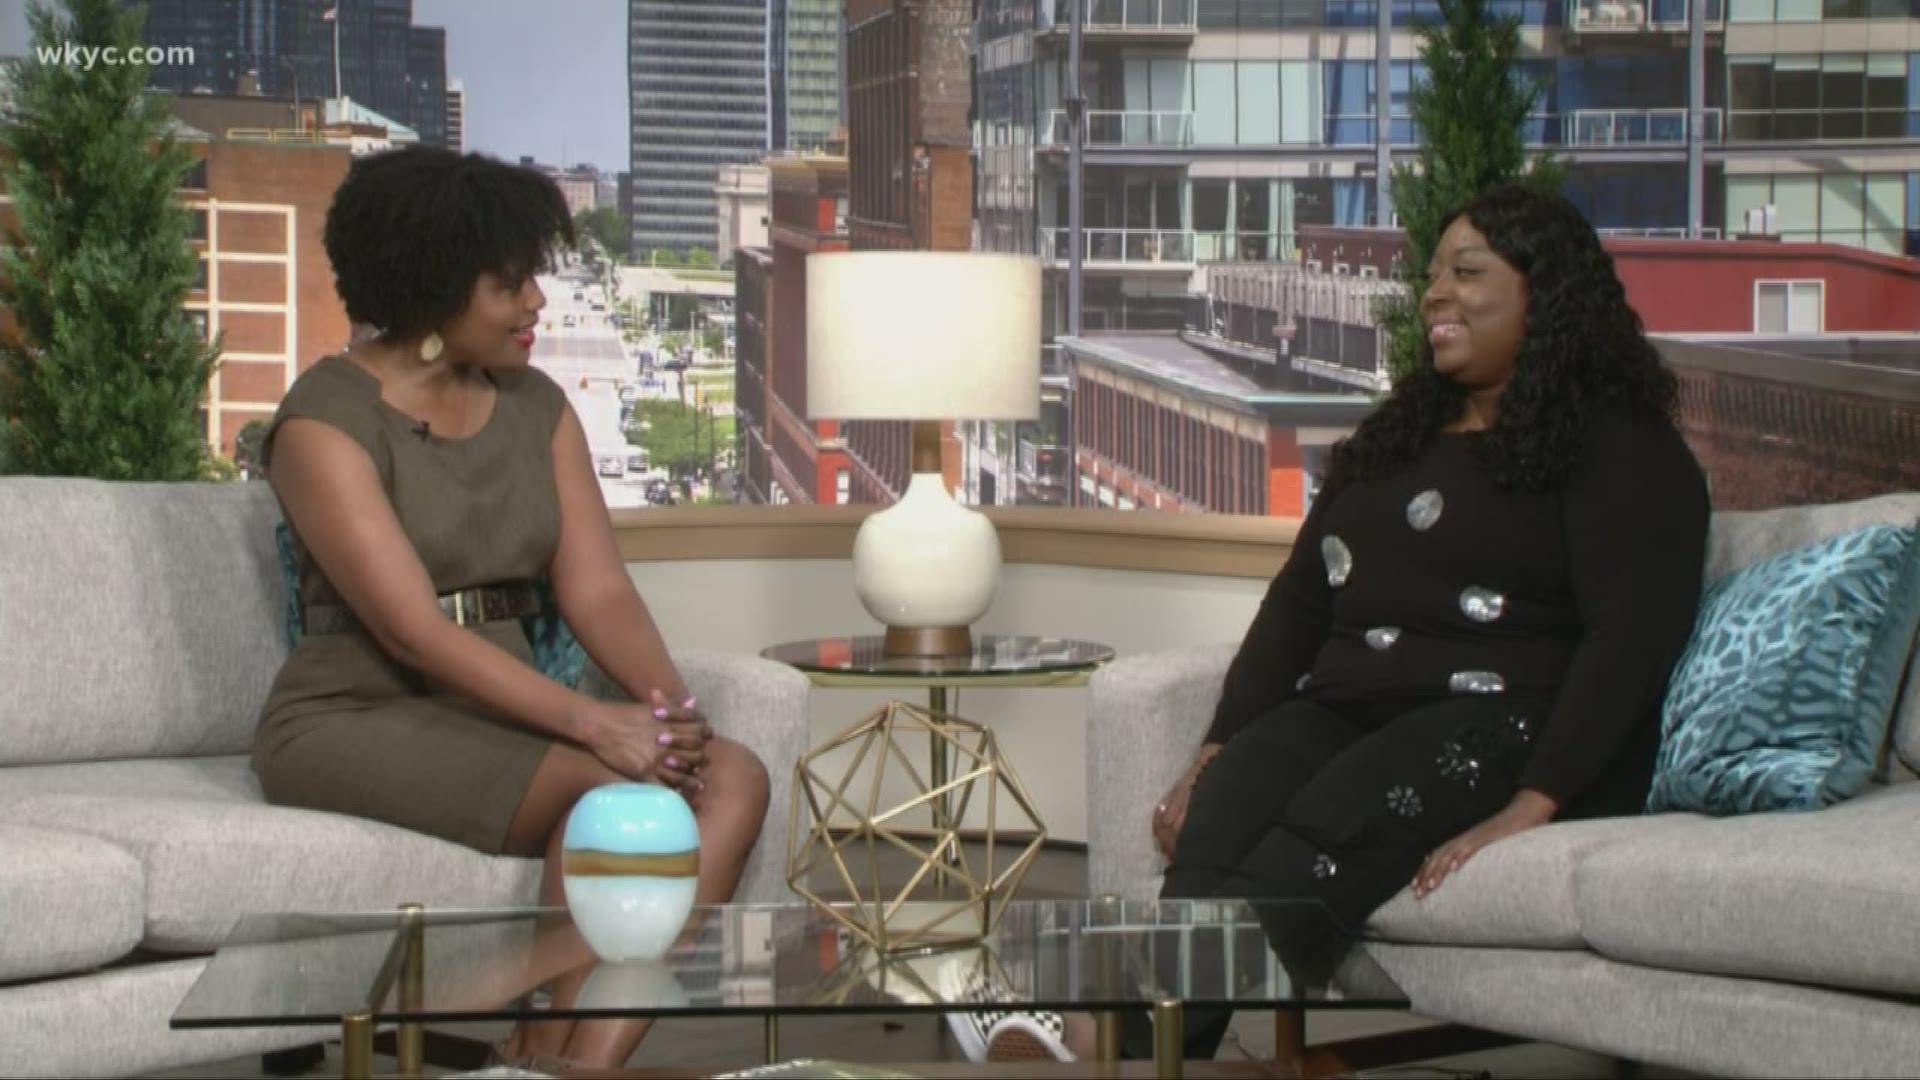 Nationally-syndicated talk show host and comedian Loni Love sat down with WKYC's Tiffany Tarpley to give Clevelanders a taste of what to expect from her stand up.